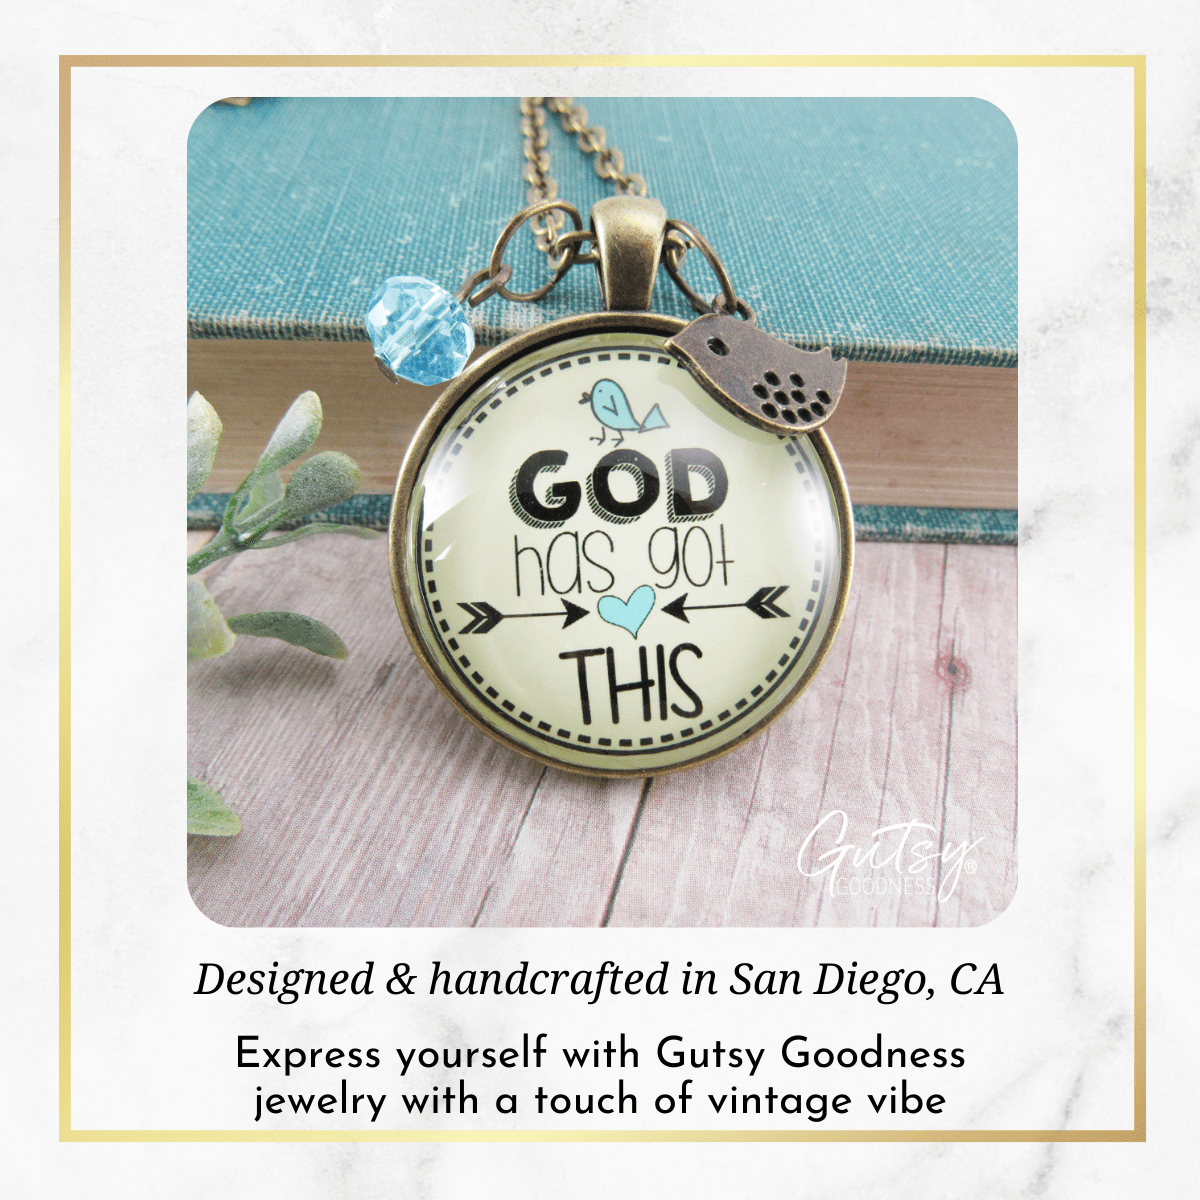 Gutsy Goodness He Has Got This Faith Inspired Jewelry Vintage Style Pendant Bird Charm - Gutsy Goodness Handmade Jewelry;He Has Got This Faith Inspired Jewelry Vintage Style Pendant Bird Charm - Gutsy Goodness Handmade Jewelry Gifts